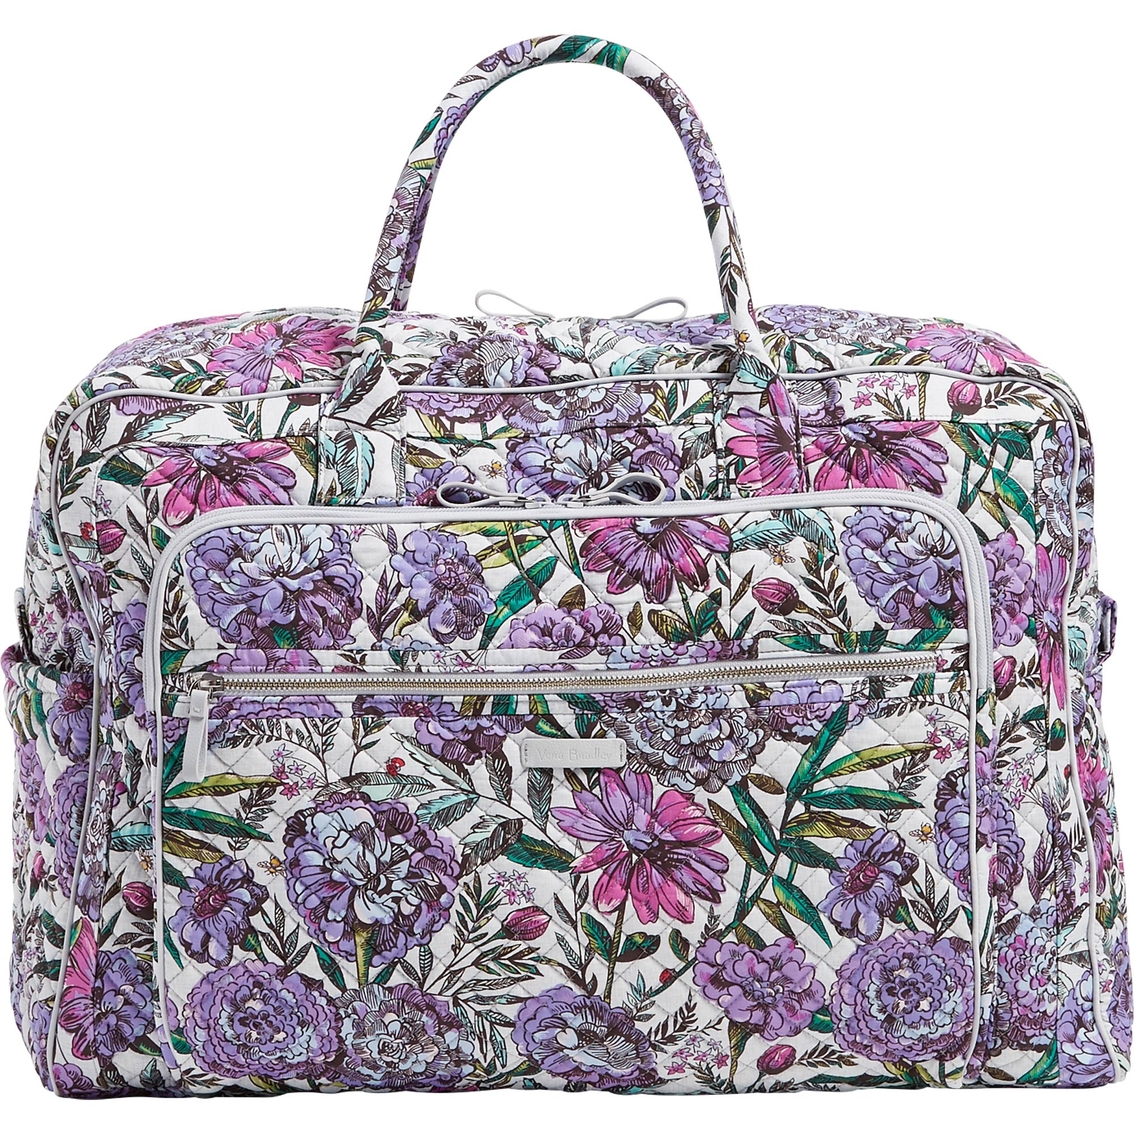 Vera Bradley Grand Weekender Travel Bag Signature Cotton, Lavender Meadow, Luggage, Clothing & Accessories